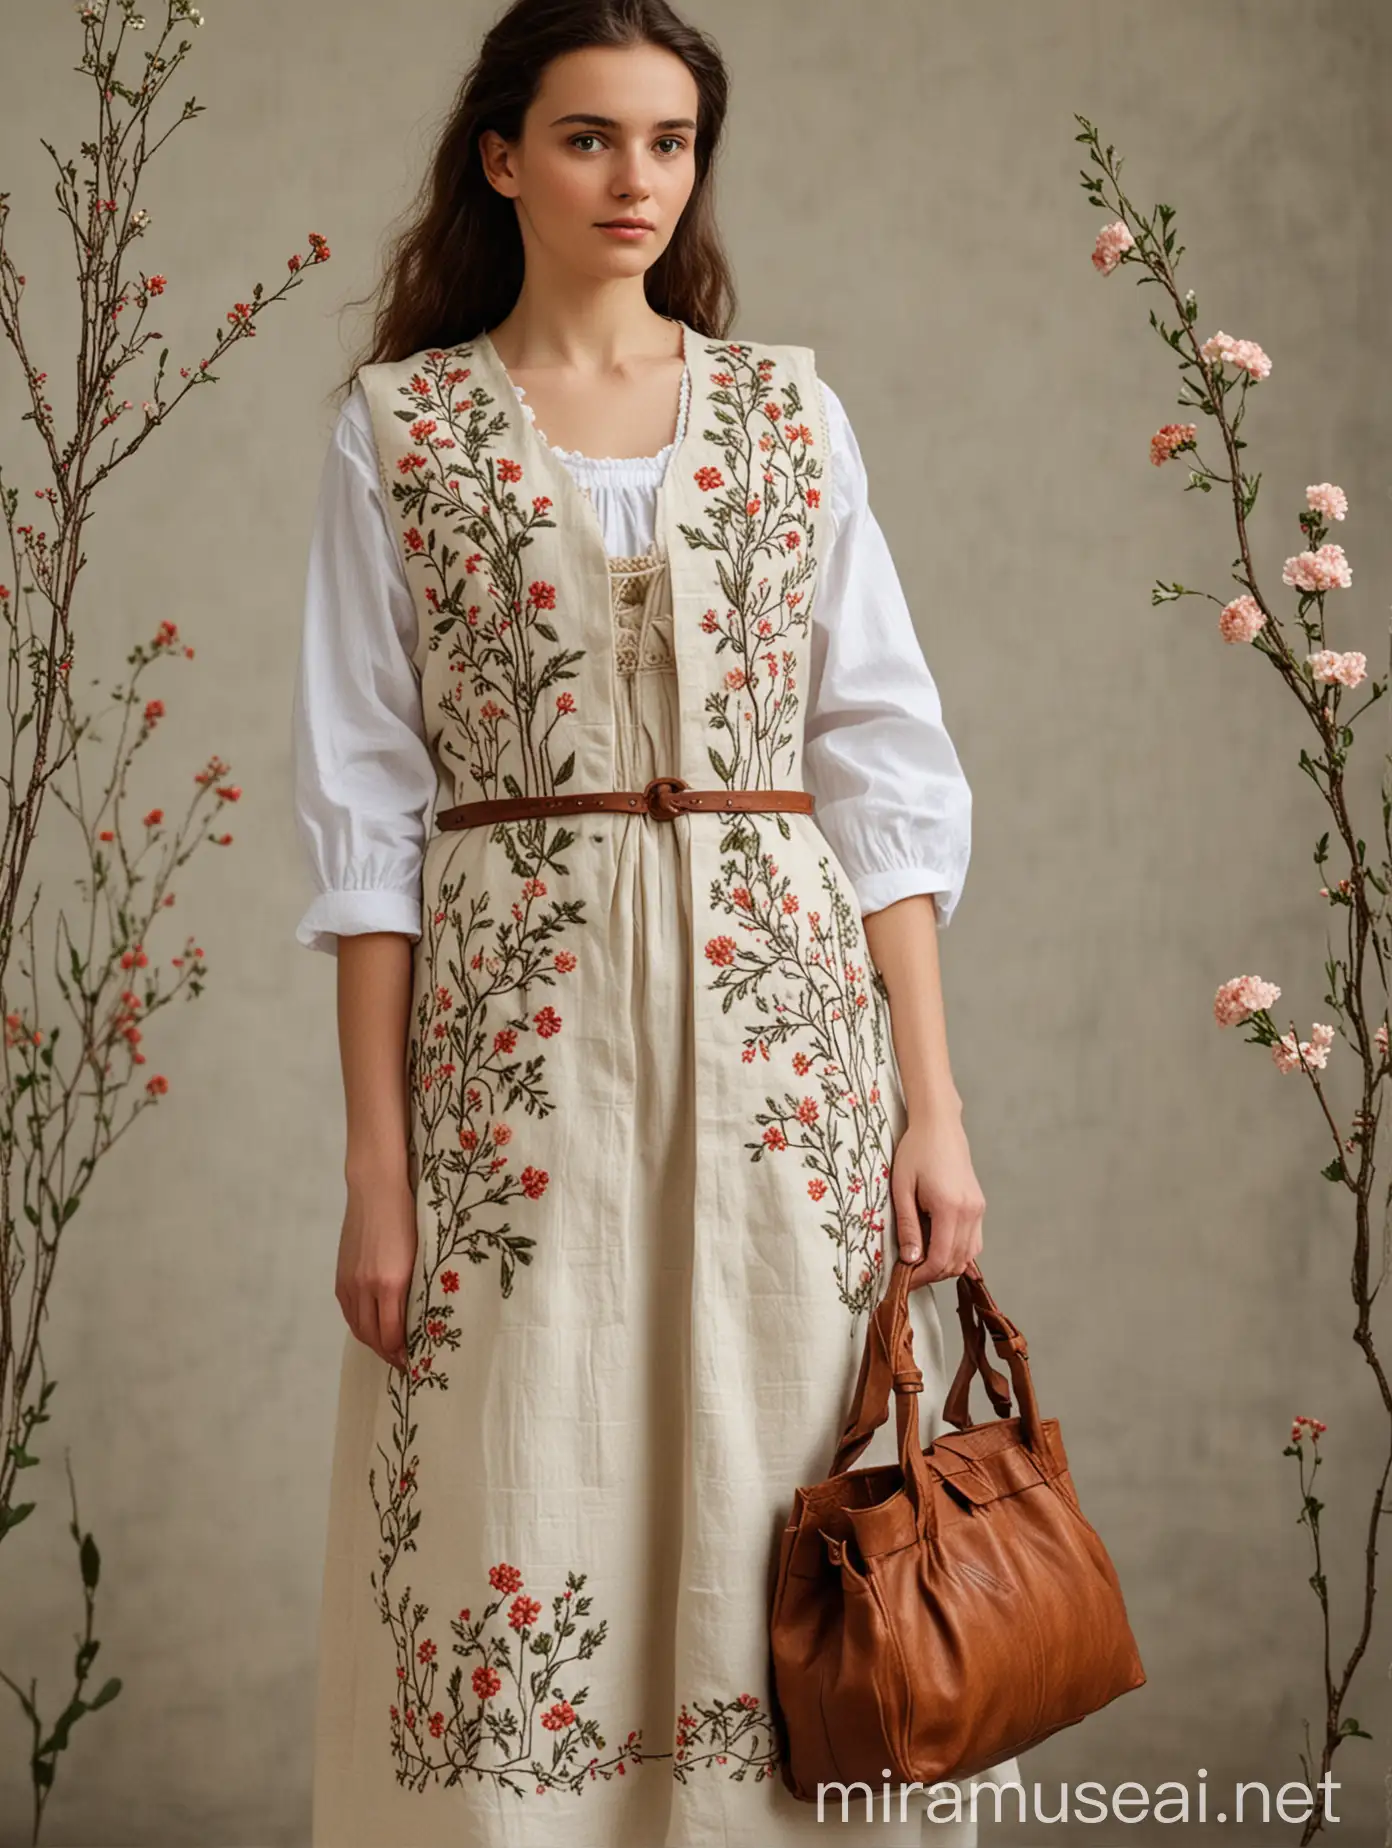 A dress and a vest, worn by a woman, made of linen, cream color, embroidered with branches and branches of carnations and hyacinths, handmade embroidery.   And a fabric and embroidered bag with a leather strap